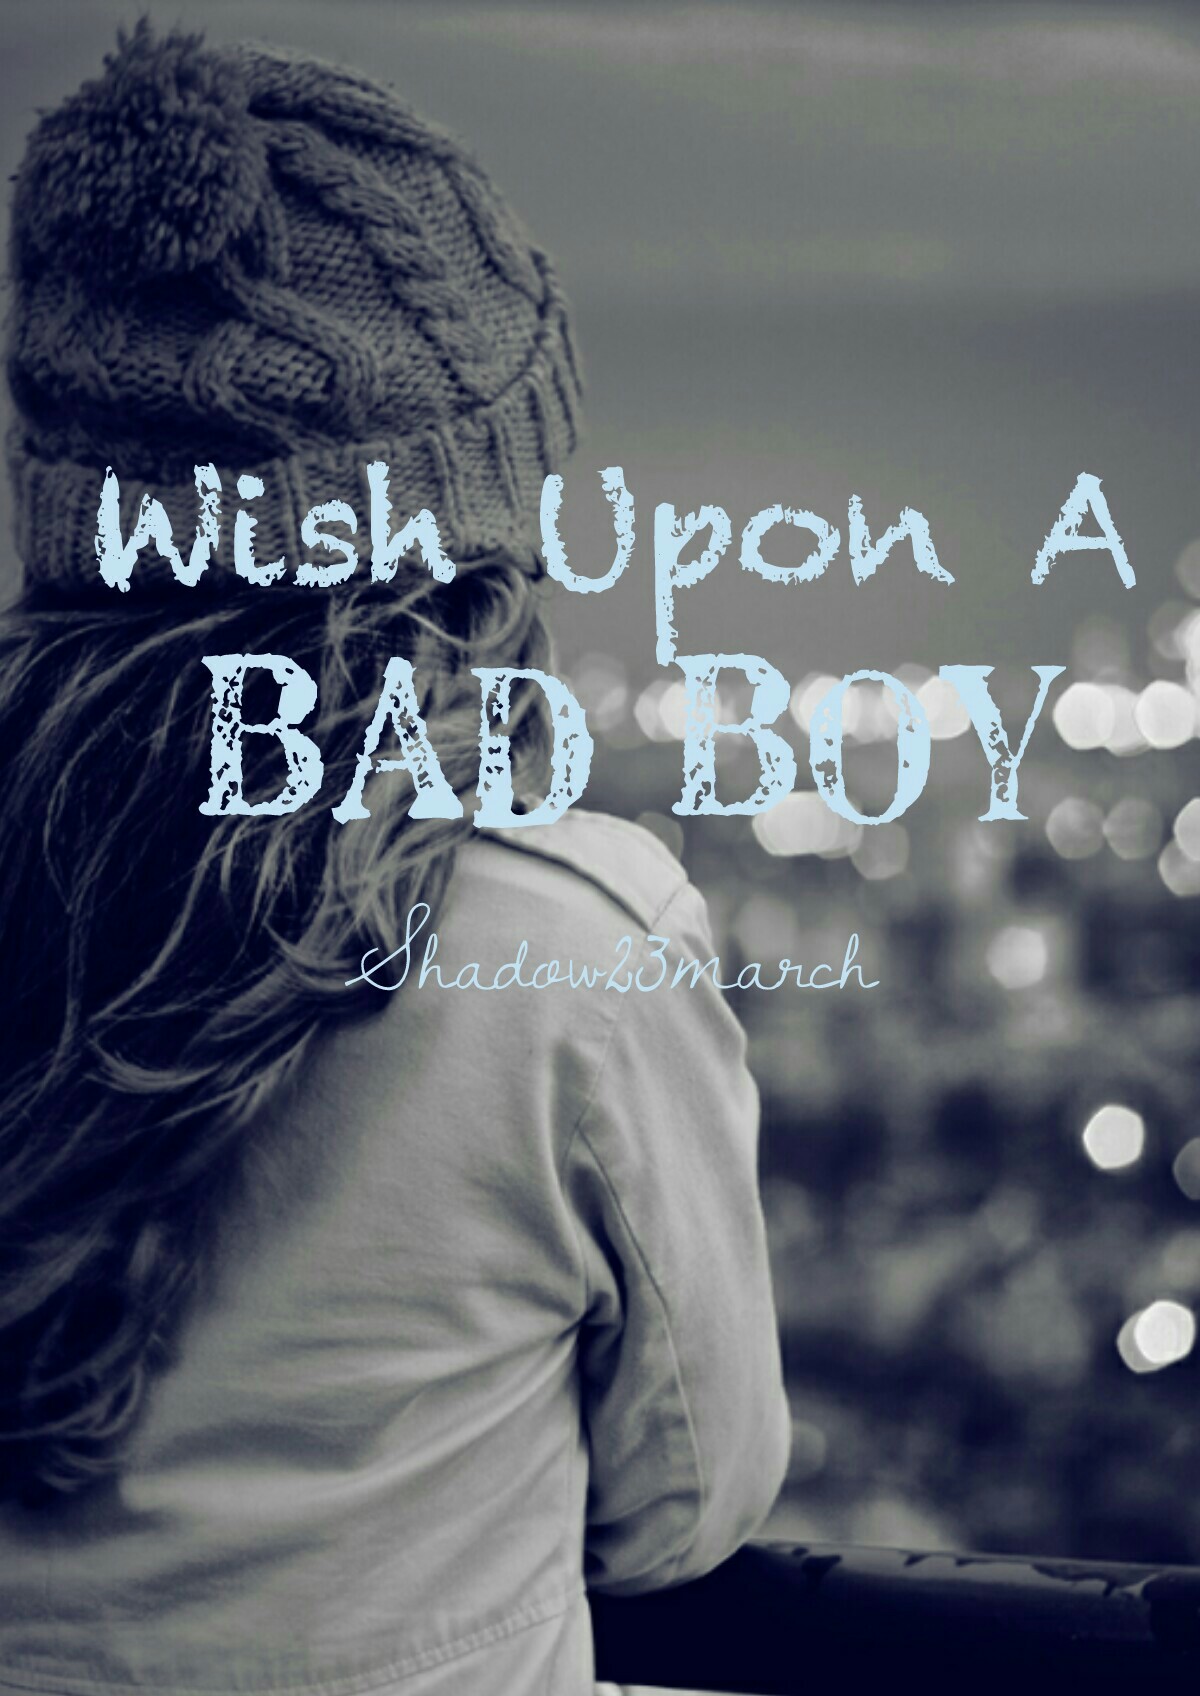 Tap
I promise this is the last book cover, Wish Upon a Badboy is a story involving a shy nerd and a fierce bad boy. Typical me, I'm a sucker for any cute romance..